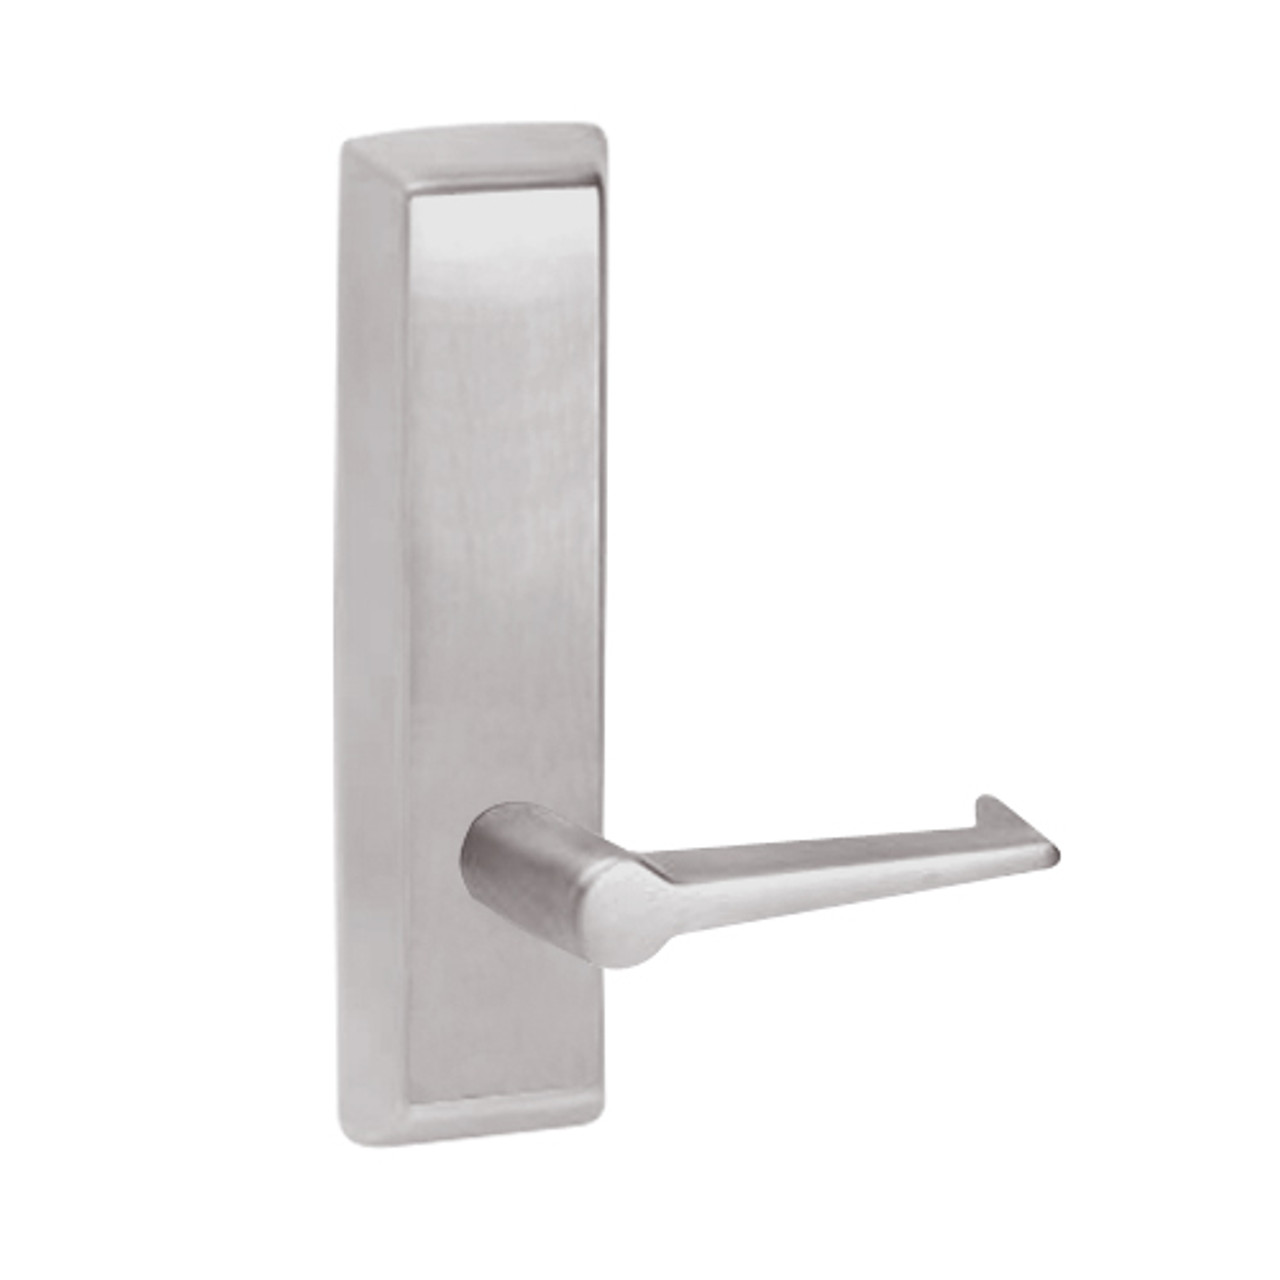 E955-630-RHR Corbin ED5000 Series Exit Device Trim with Classroom Essex Lever in Satin Stainless Steel Finish